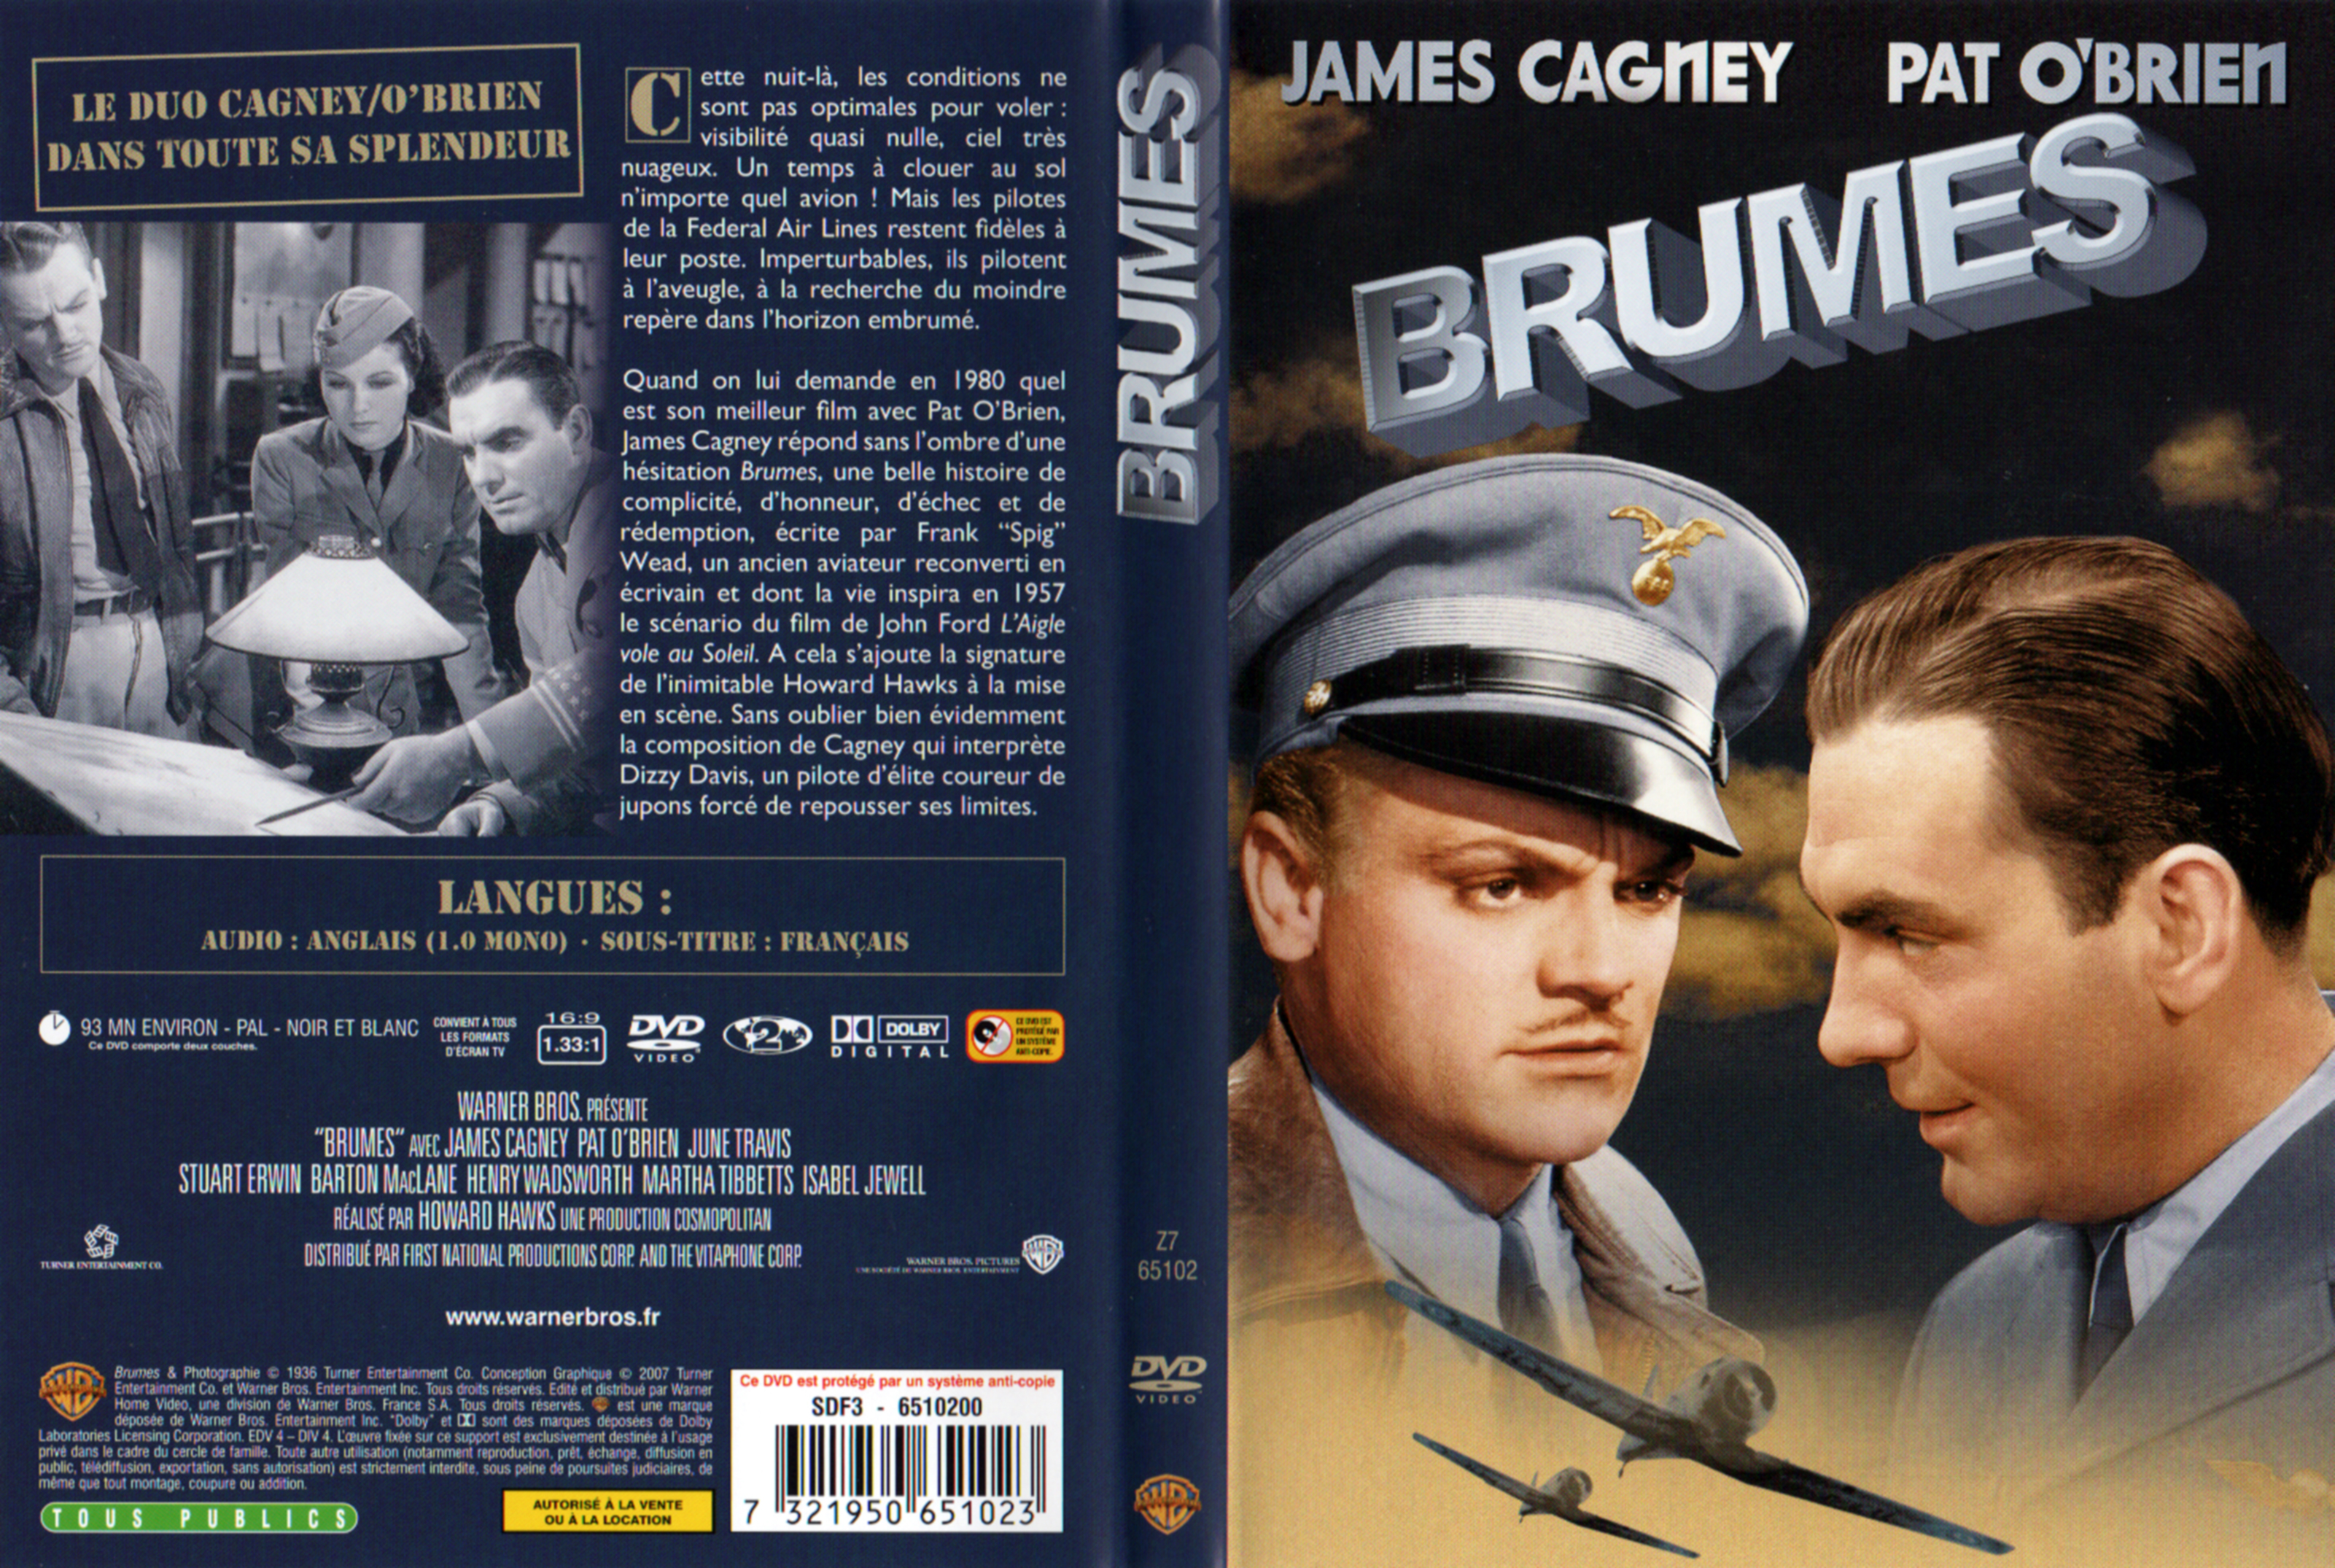 Jaquette DVD Brumes